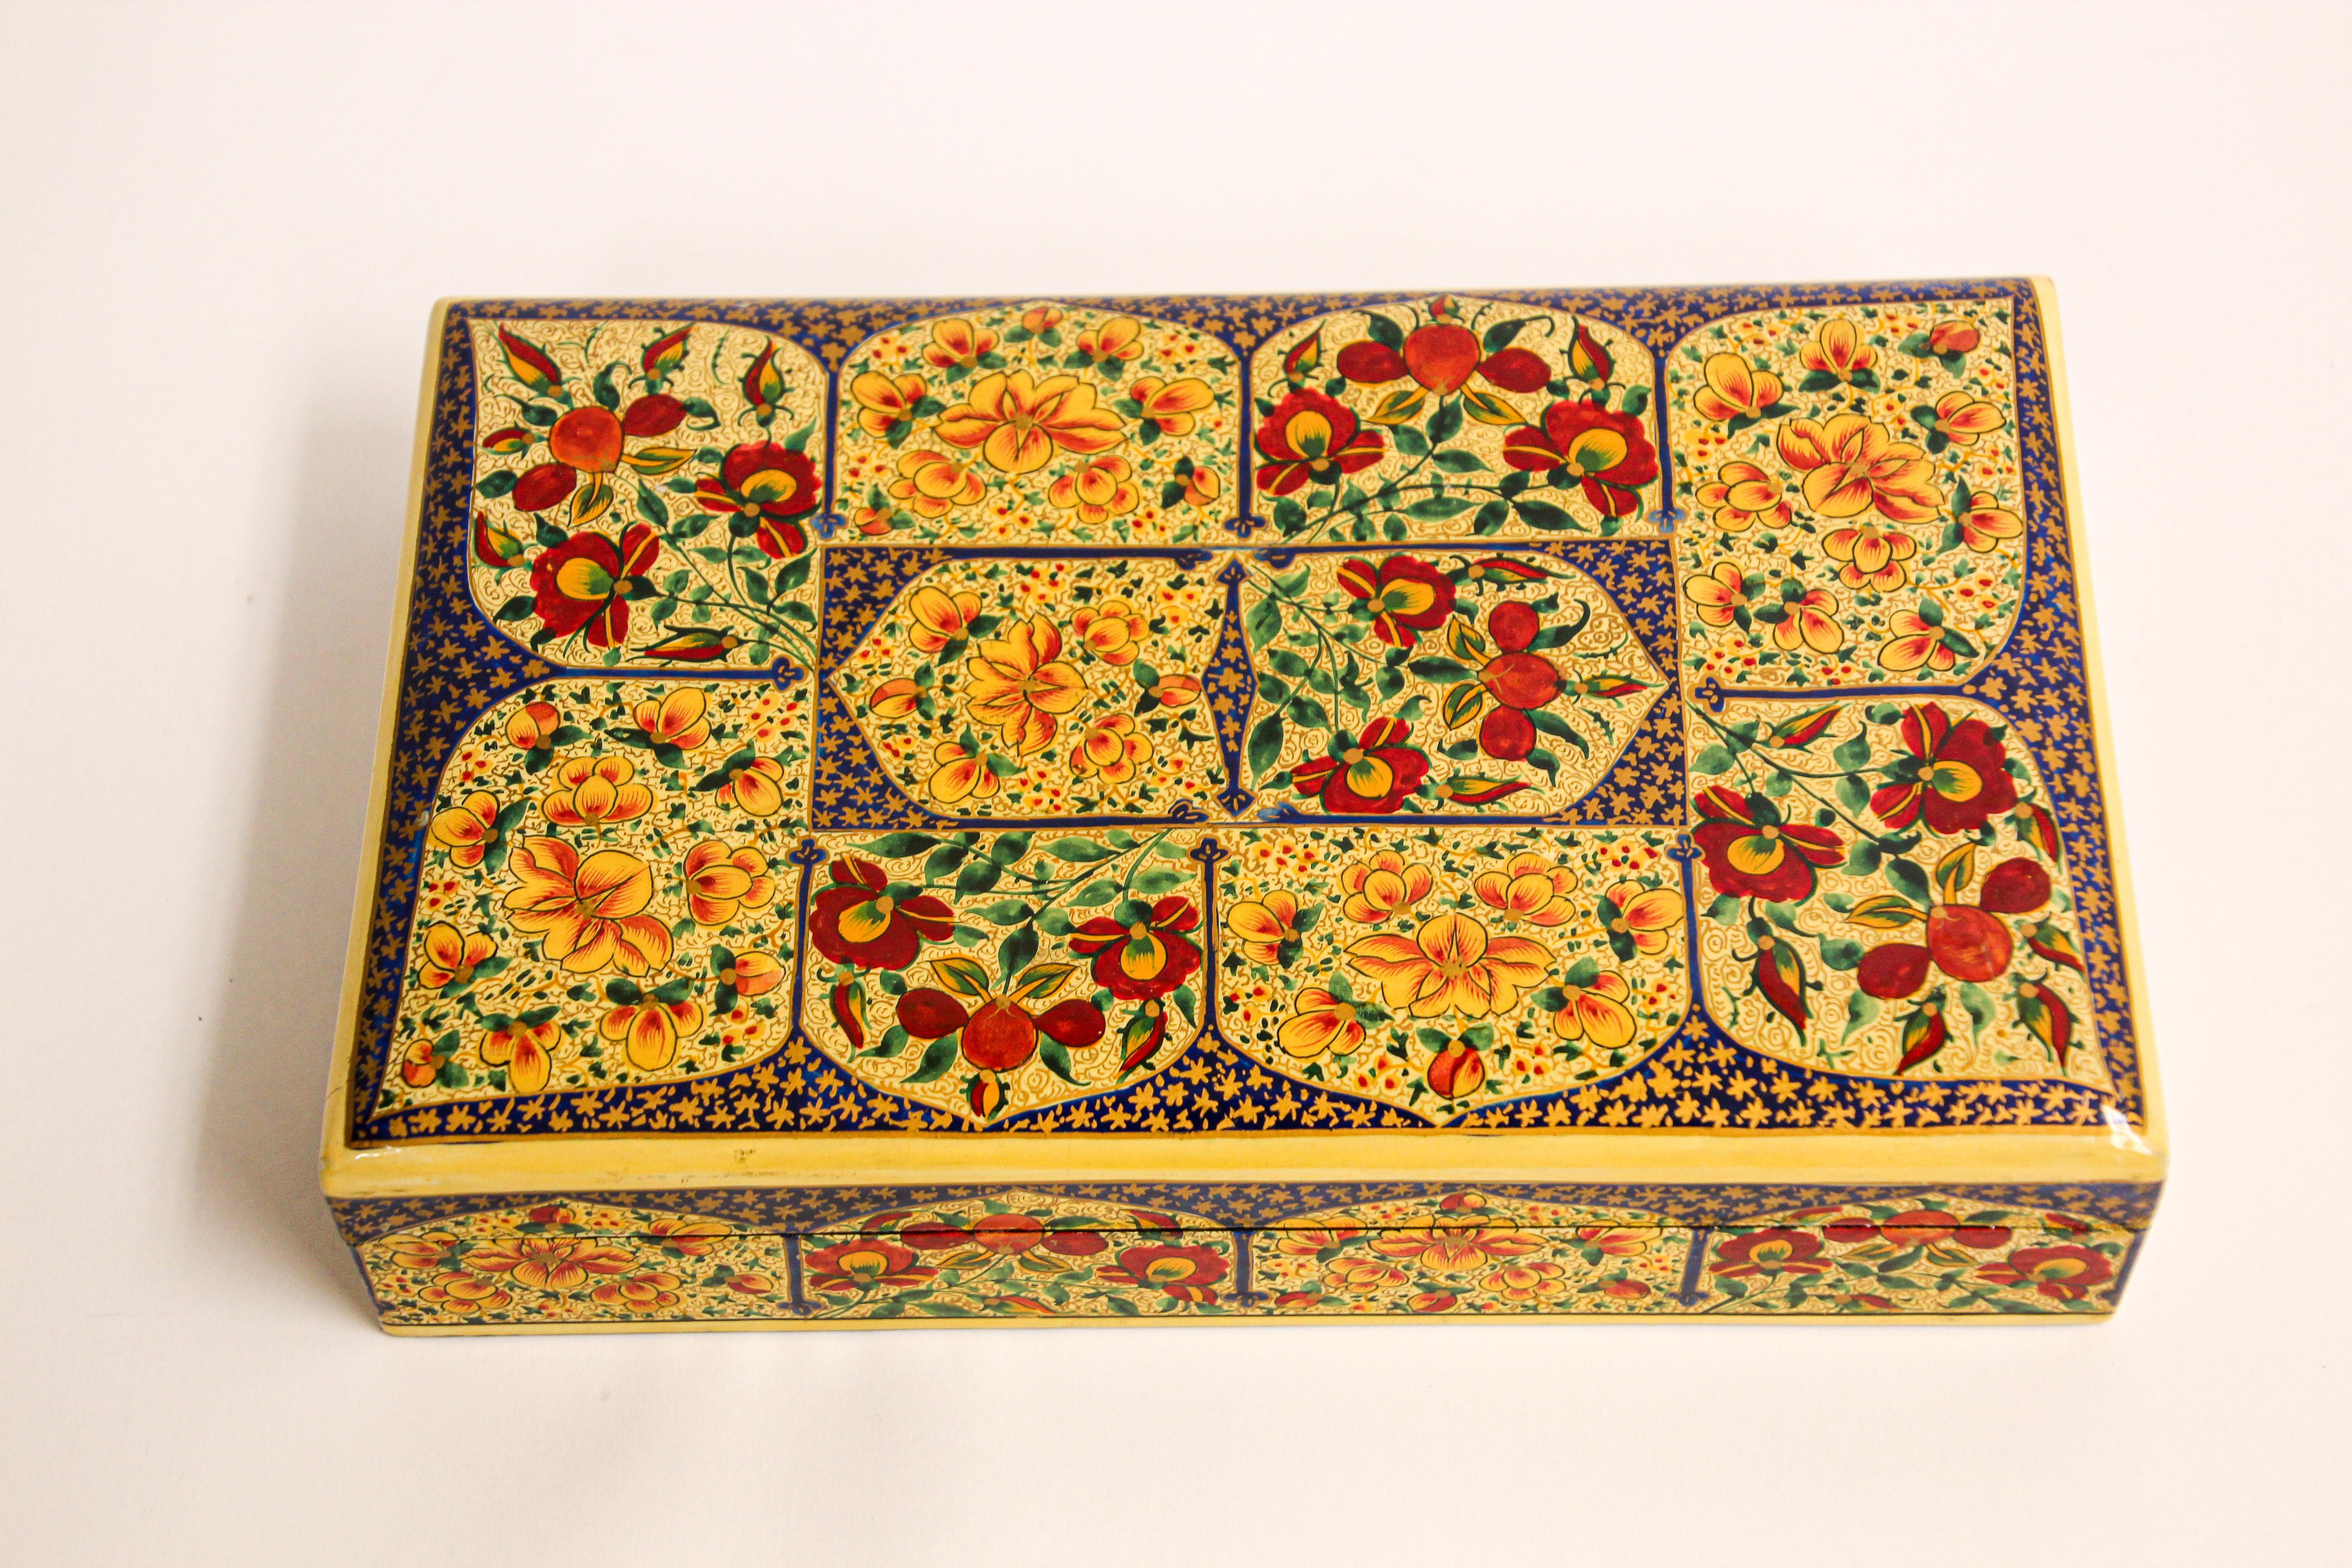 Hand-Painted Hand Painted Rajasthani Lacquer Decorative Box For Sale